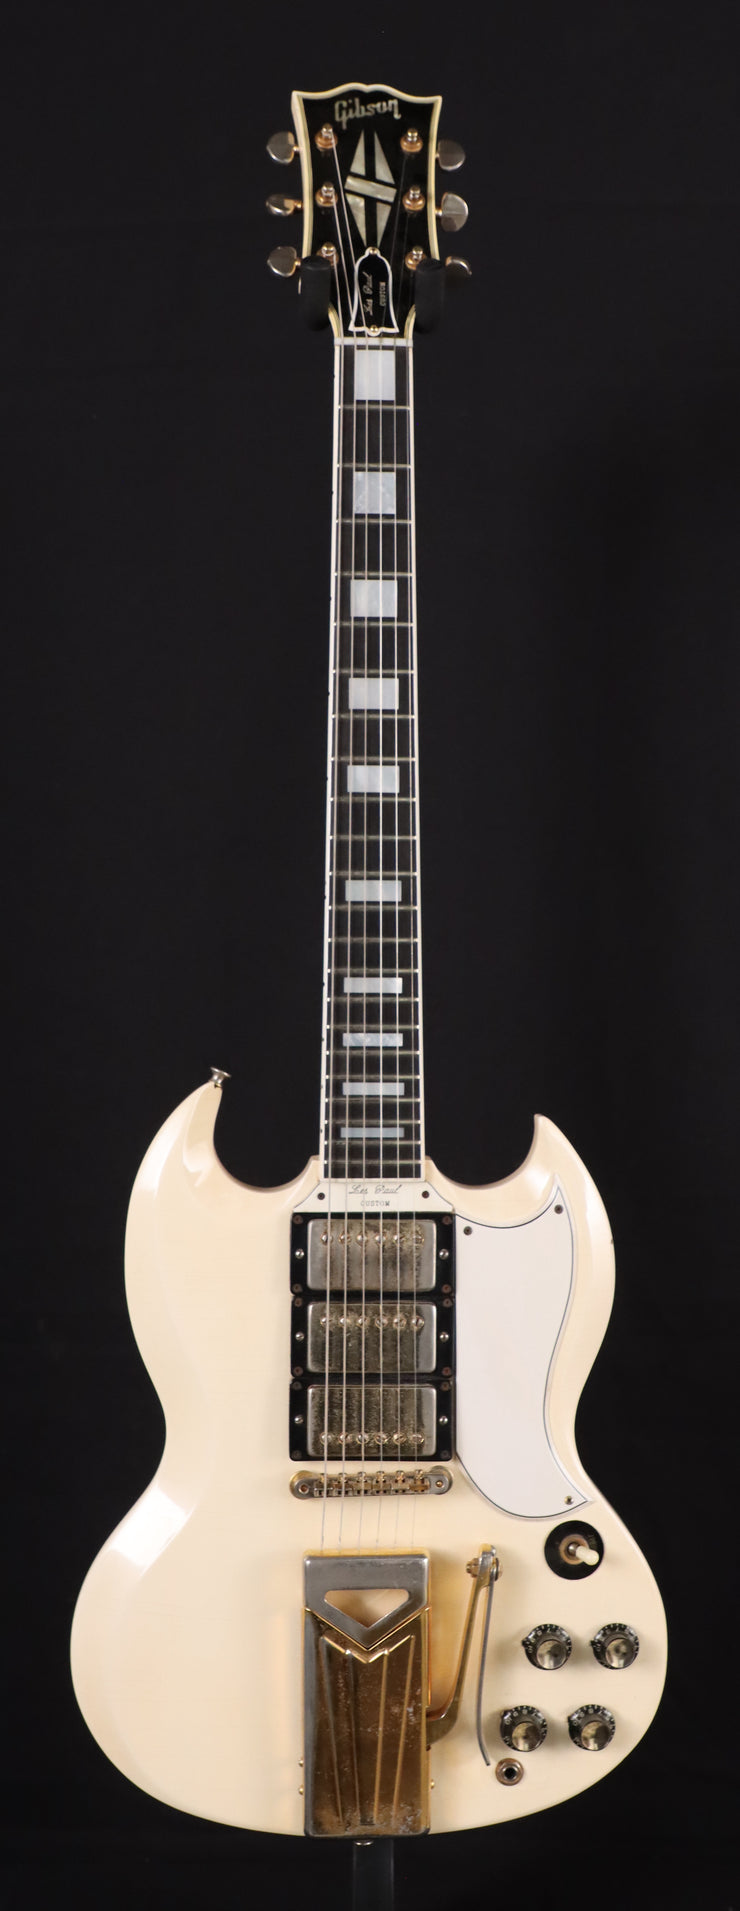 1961 Gibson Les Paul owned by Neal Schon